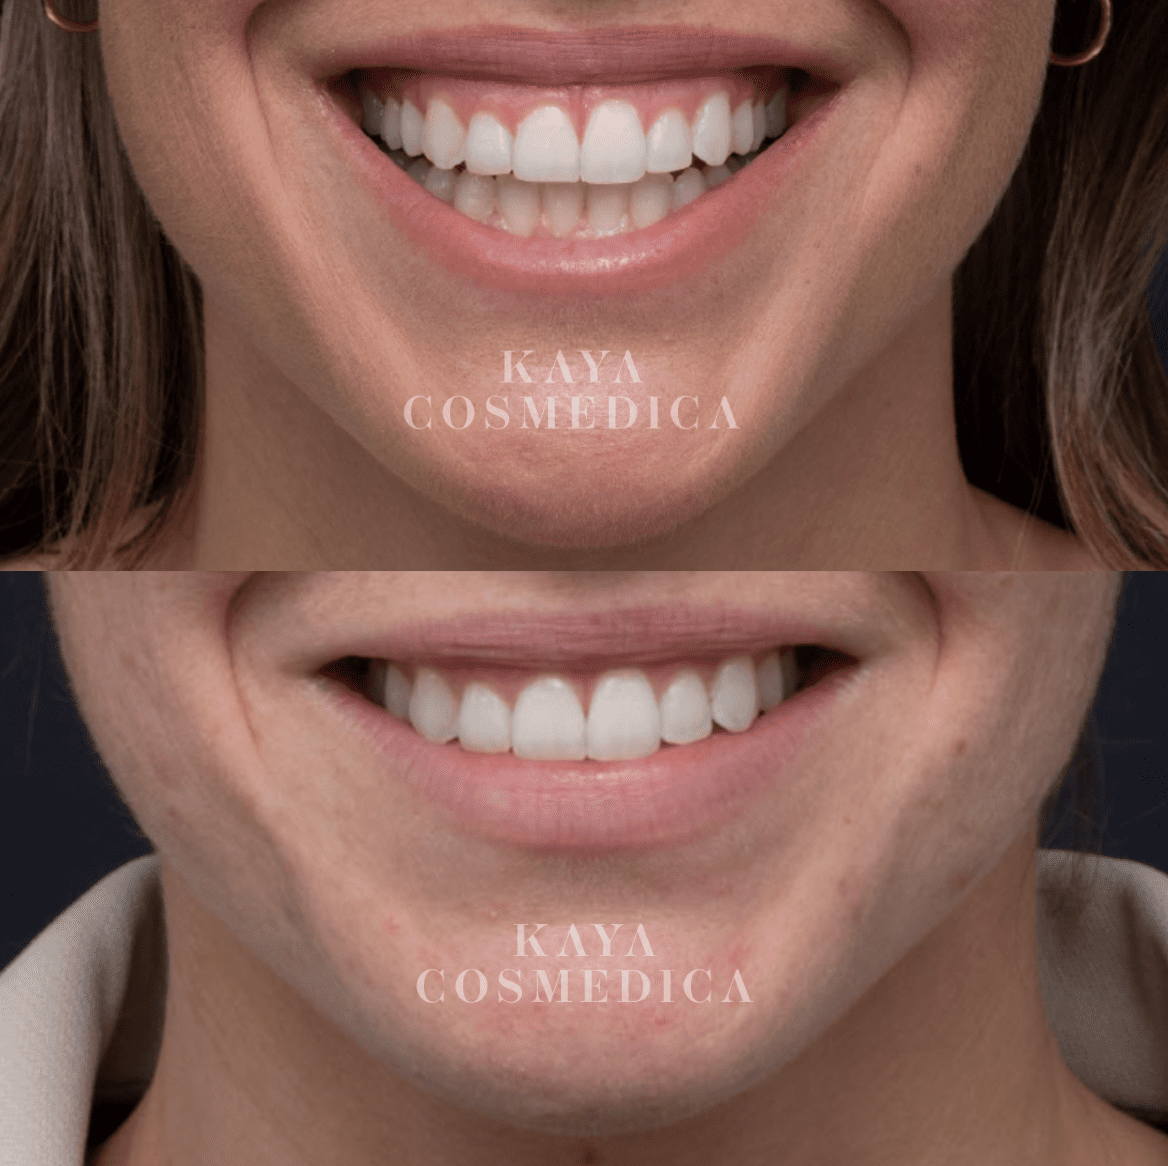 Before and after close-up photos of a smiling person's mouth showing teeth whitening results from a cosmetic procedure. The image includes the logo "Kaya Cosmedica" on both photos.